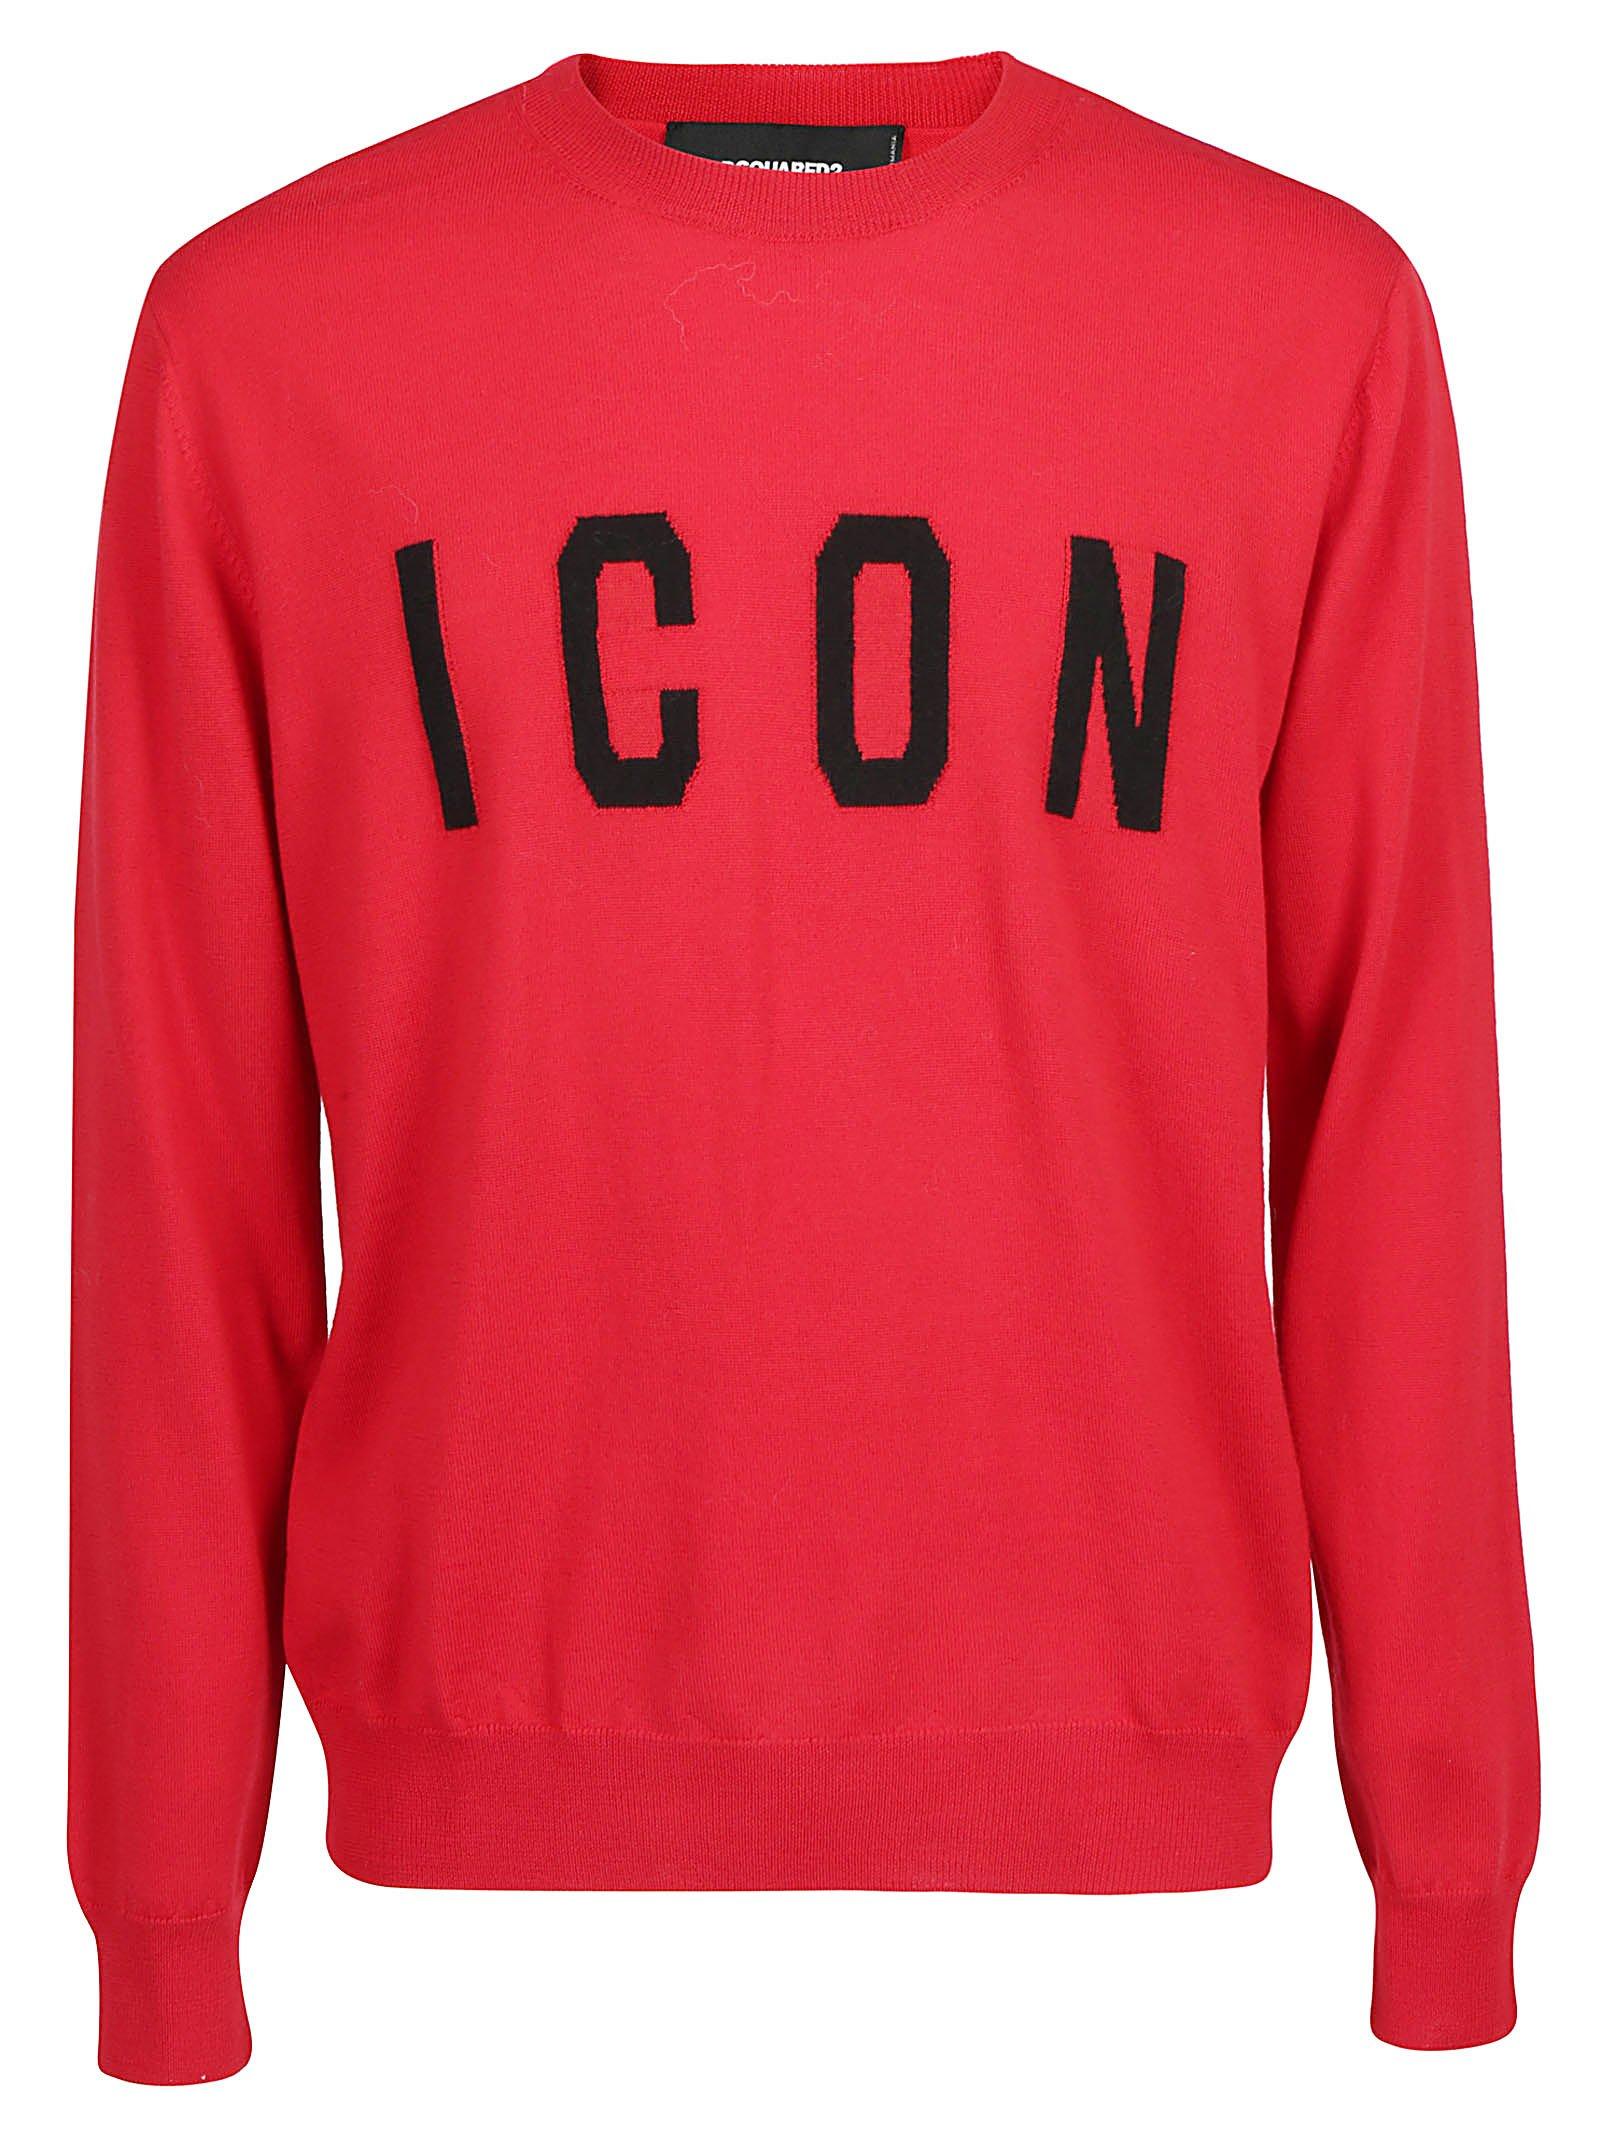 DSquared² Wool Icon Logo Knitted Jumper in Red for Men - Lyst